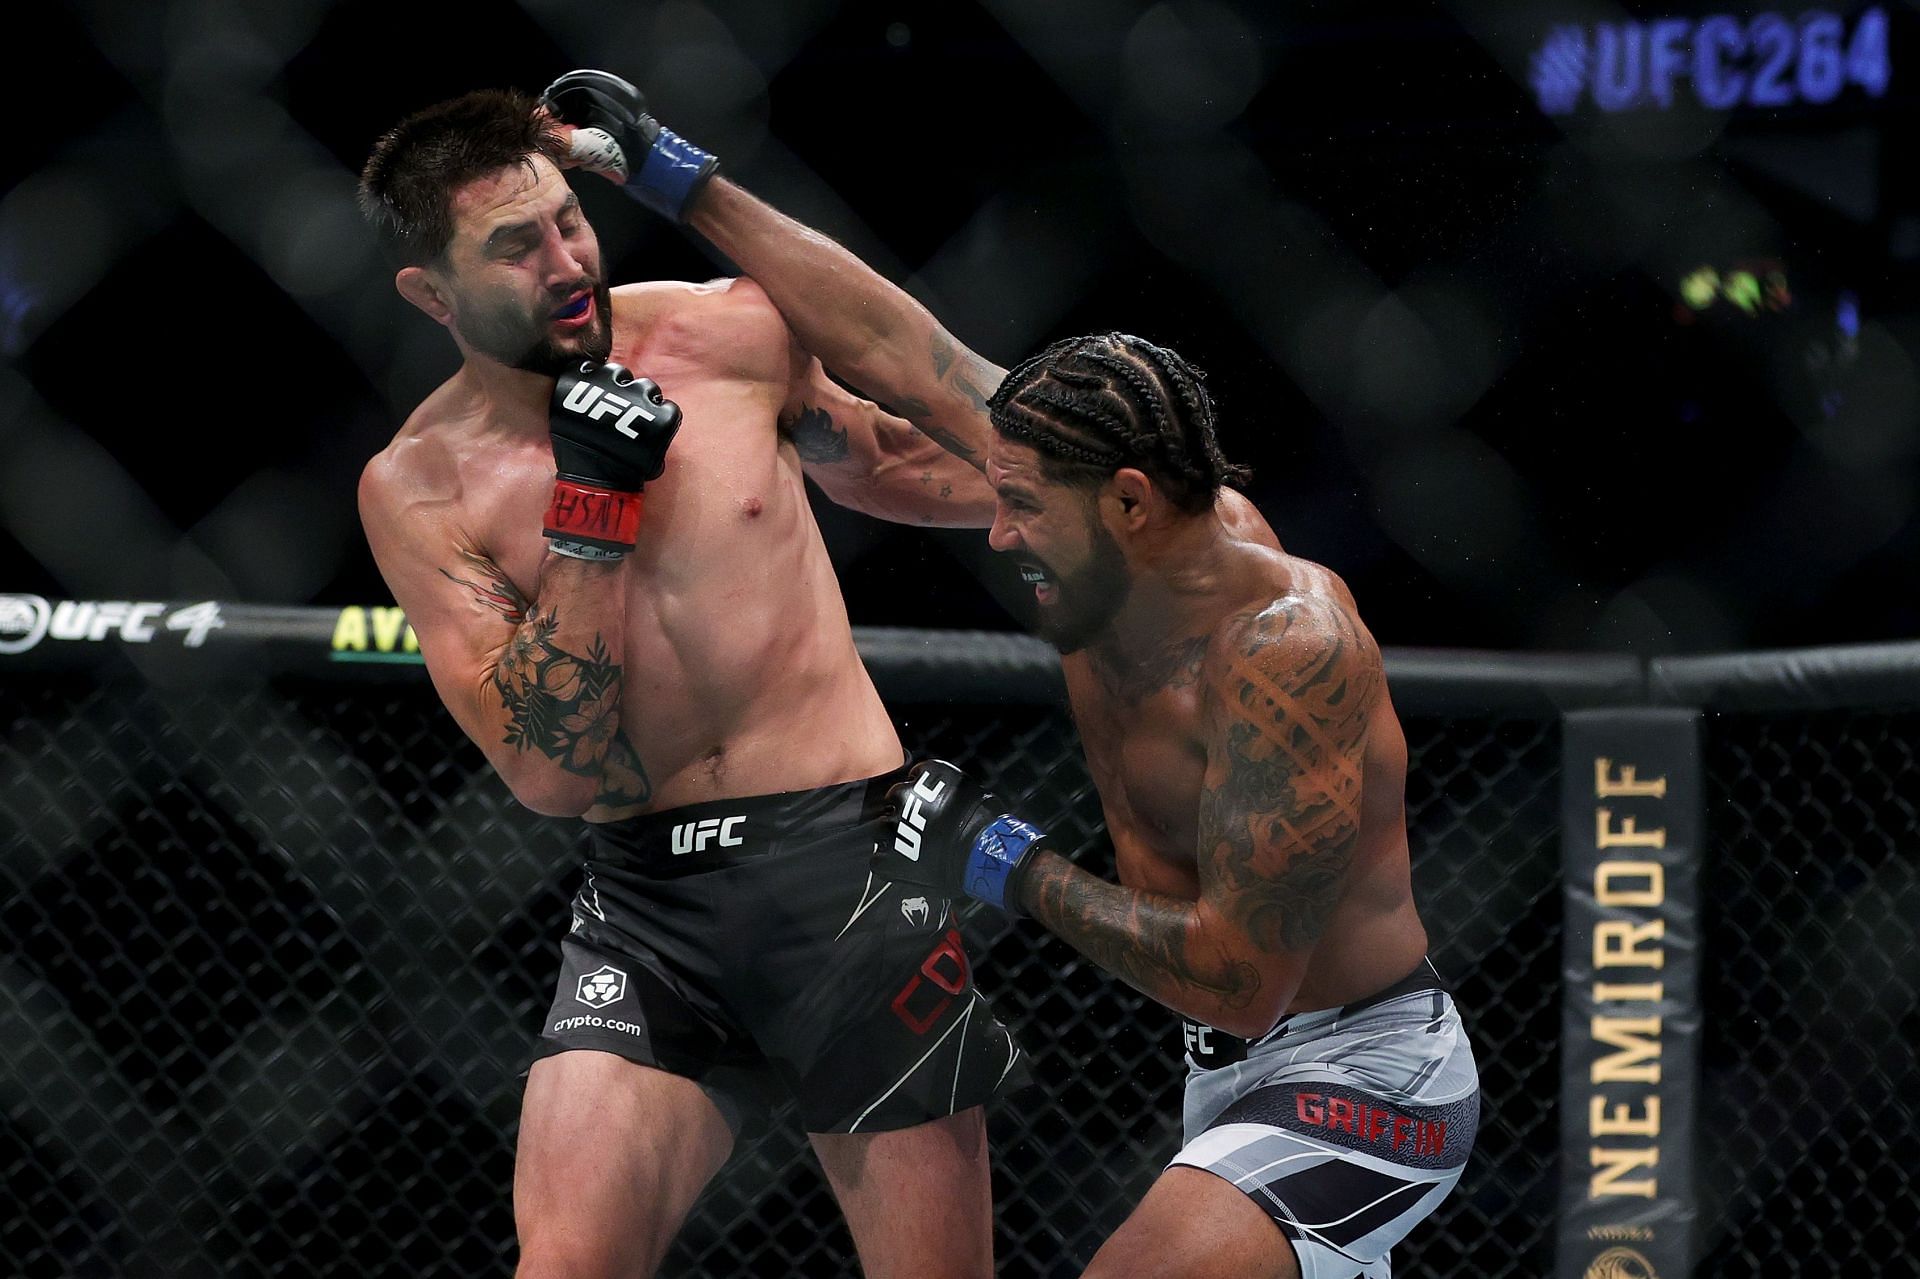 Carlos Condit struggled throughout his return from retirement